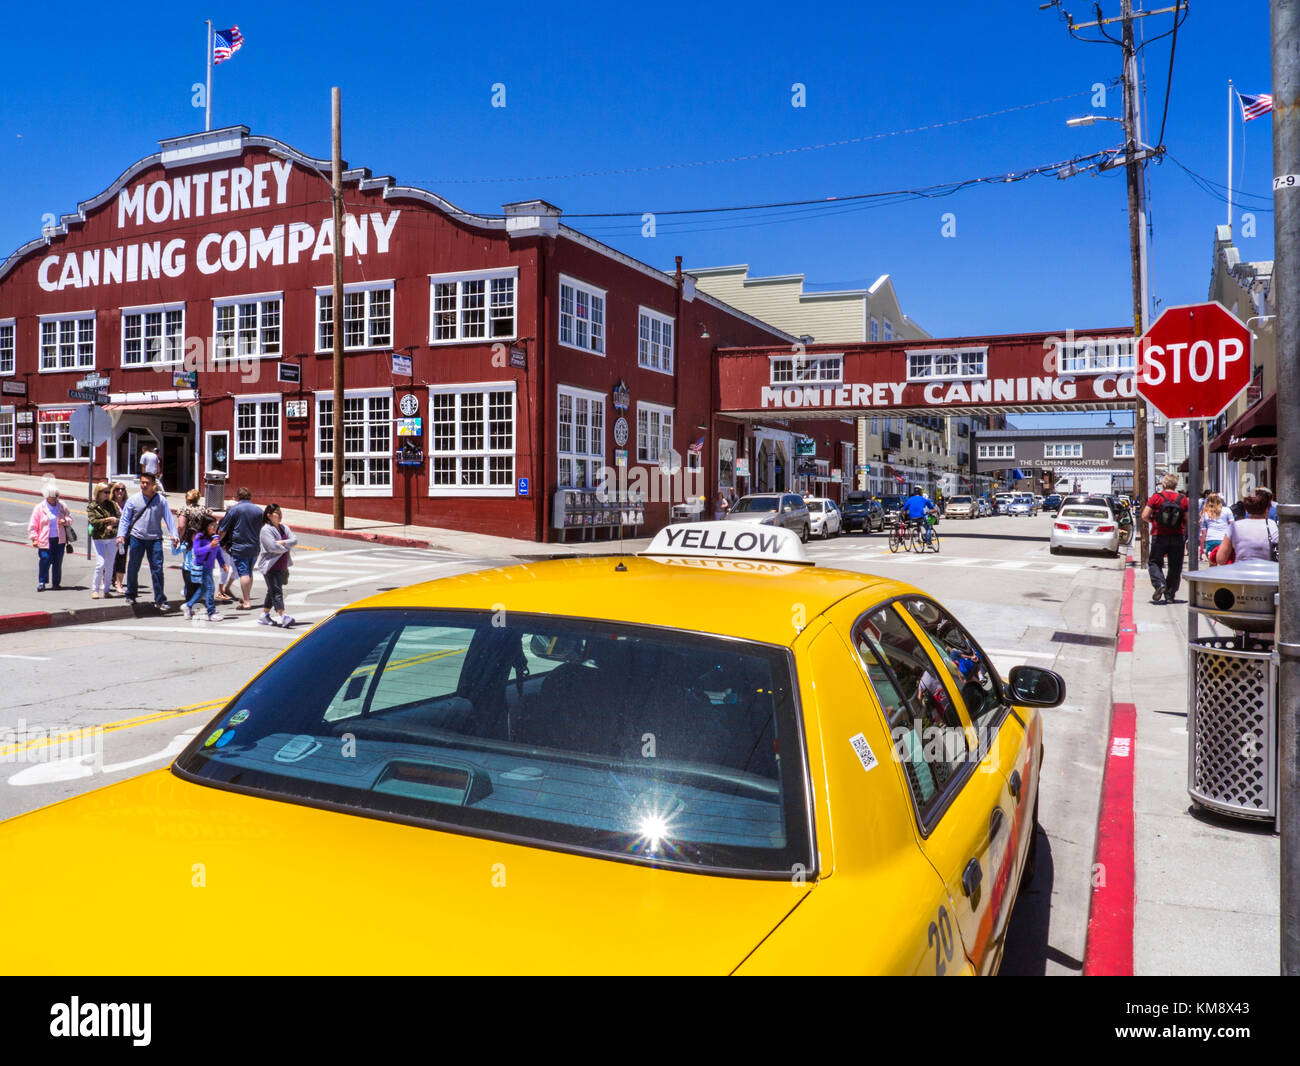 AMERICANA CANNERY ROW TOURISM Monterey Canning Company building flying stars & stripes American Flag , Cannery Row with traditional yellow city taxi cab in foreground Monterey California USA Stock Photo